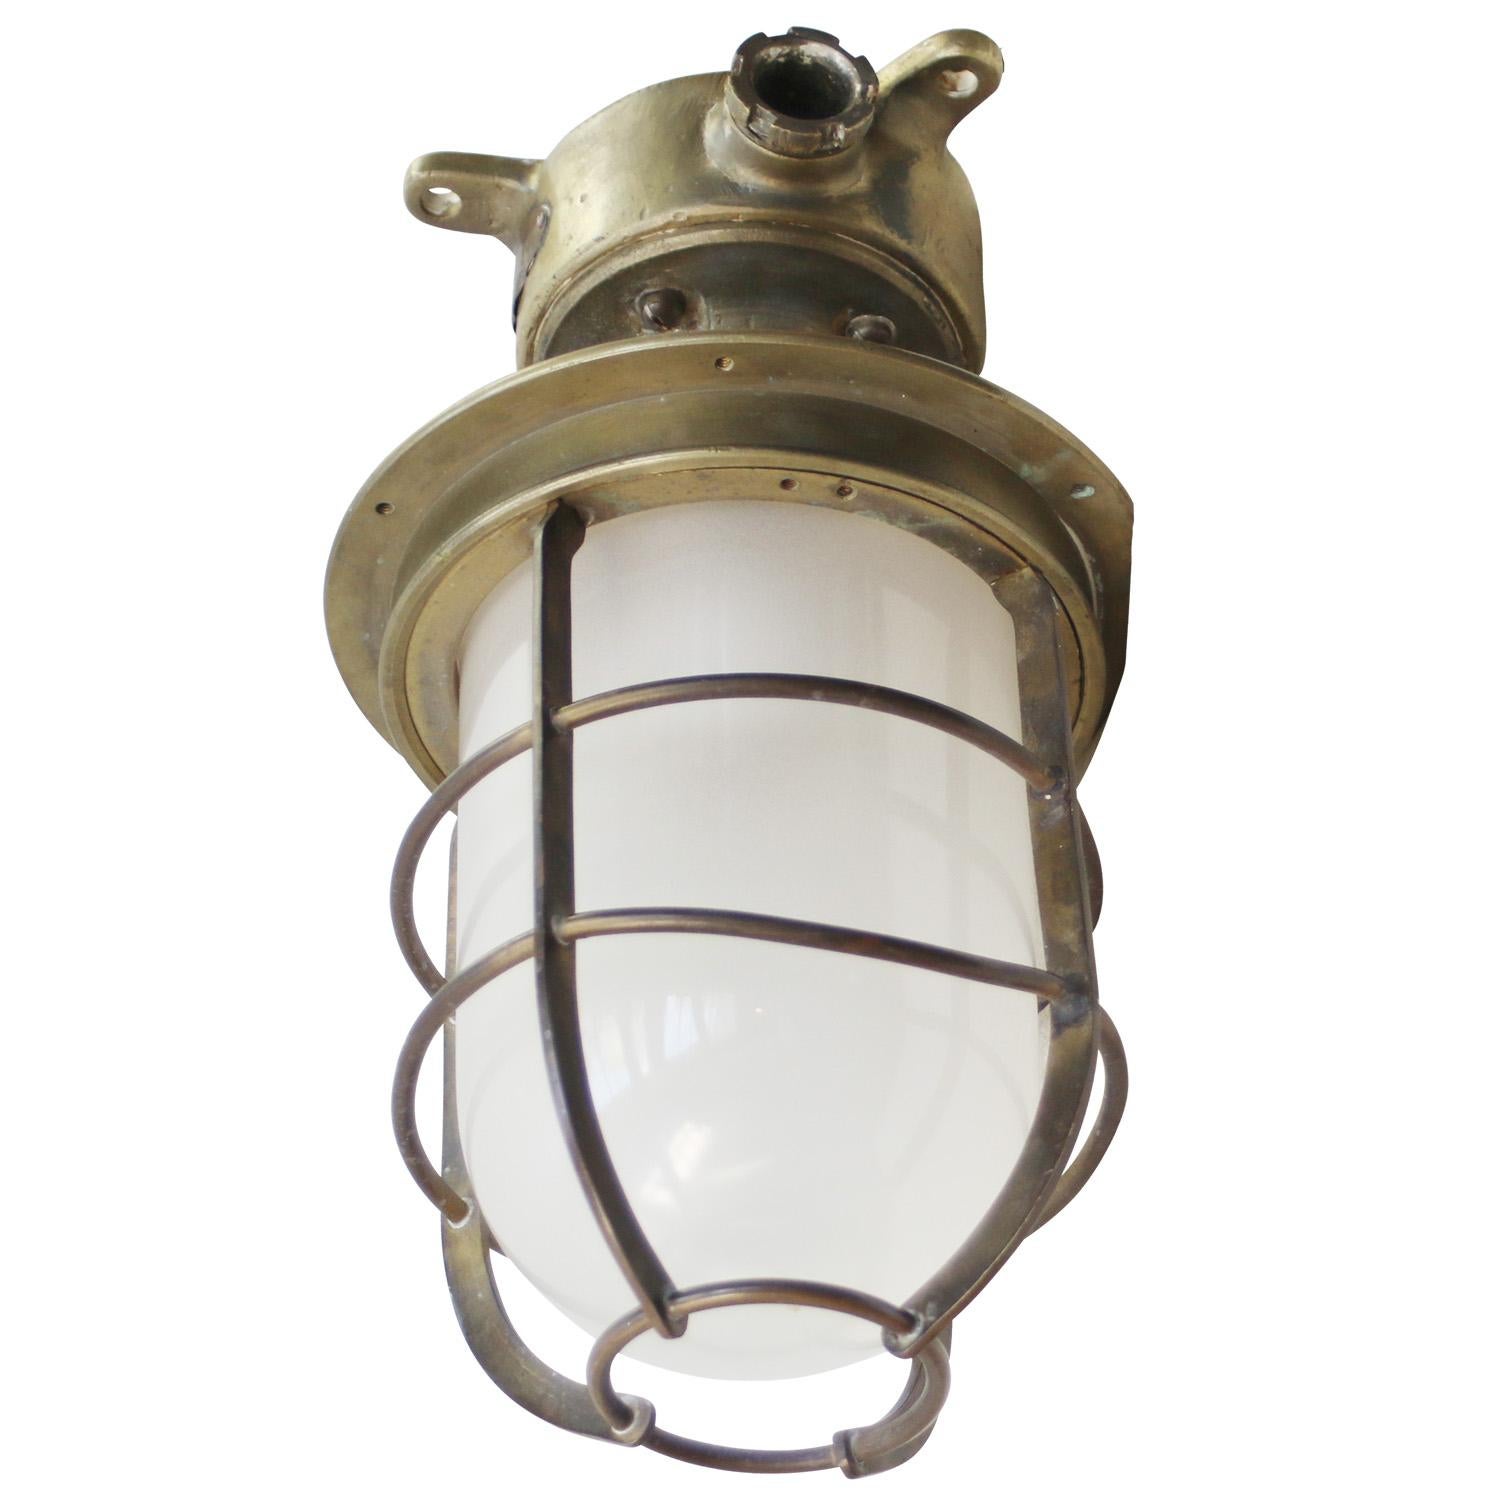 Frosted Copper Opaline Glass Vintage Industrial Nautical Ceiling Light Flush Mount